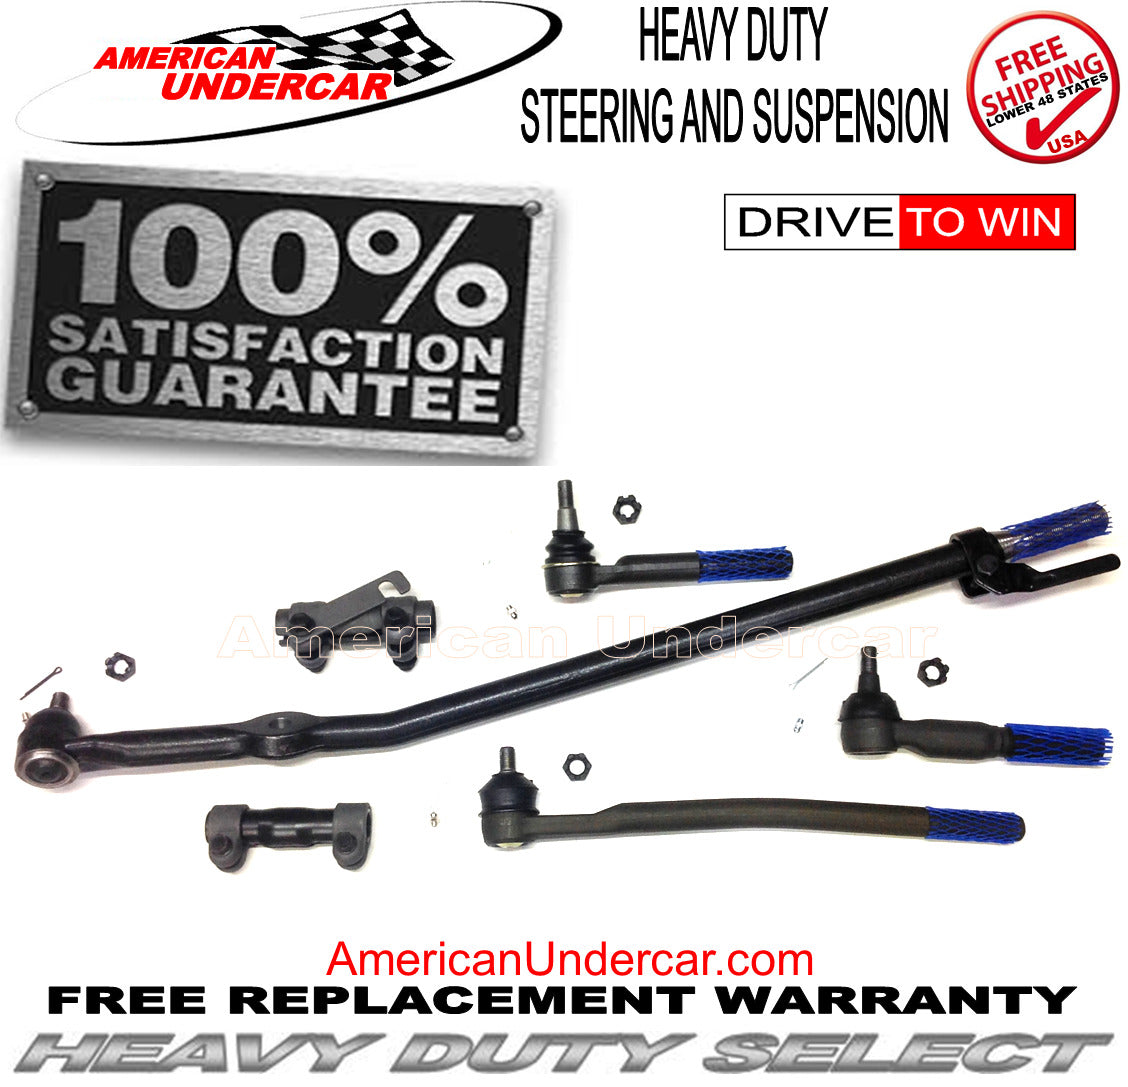 HD Super Duty Drag Link Tie Rod Sleeve Steering Kit for 1999-2004 Ford F350 Super Duty 2WD